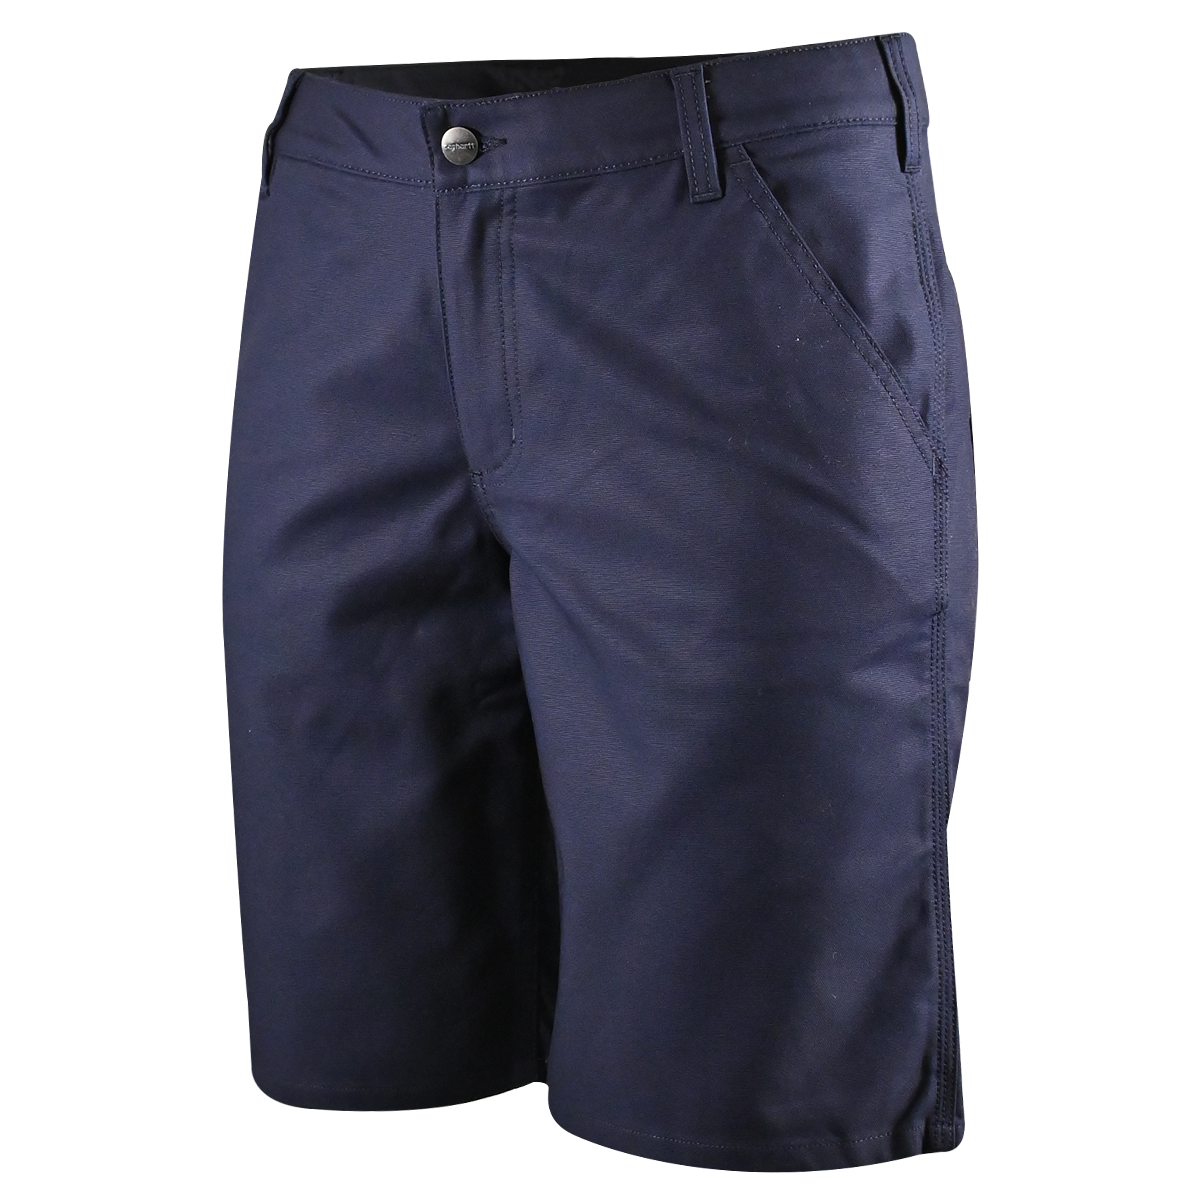 Carhartt Women's Chino Shorts Navy Rugged Flex Rigby Relaxed Fit